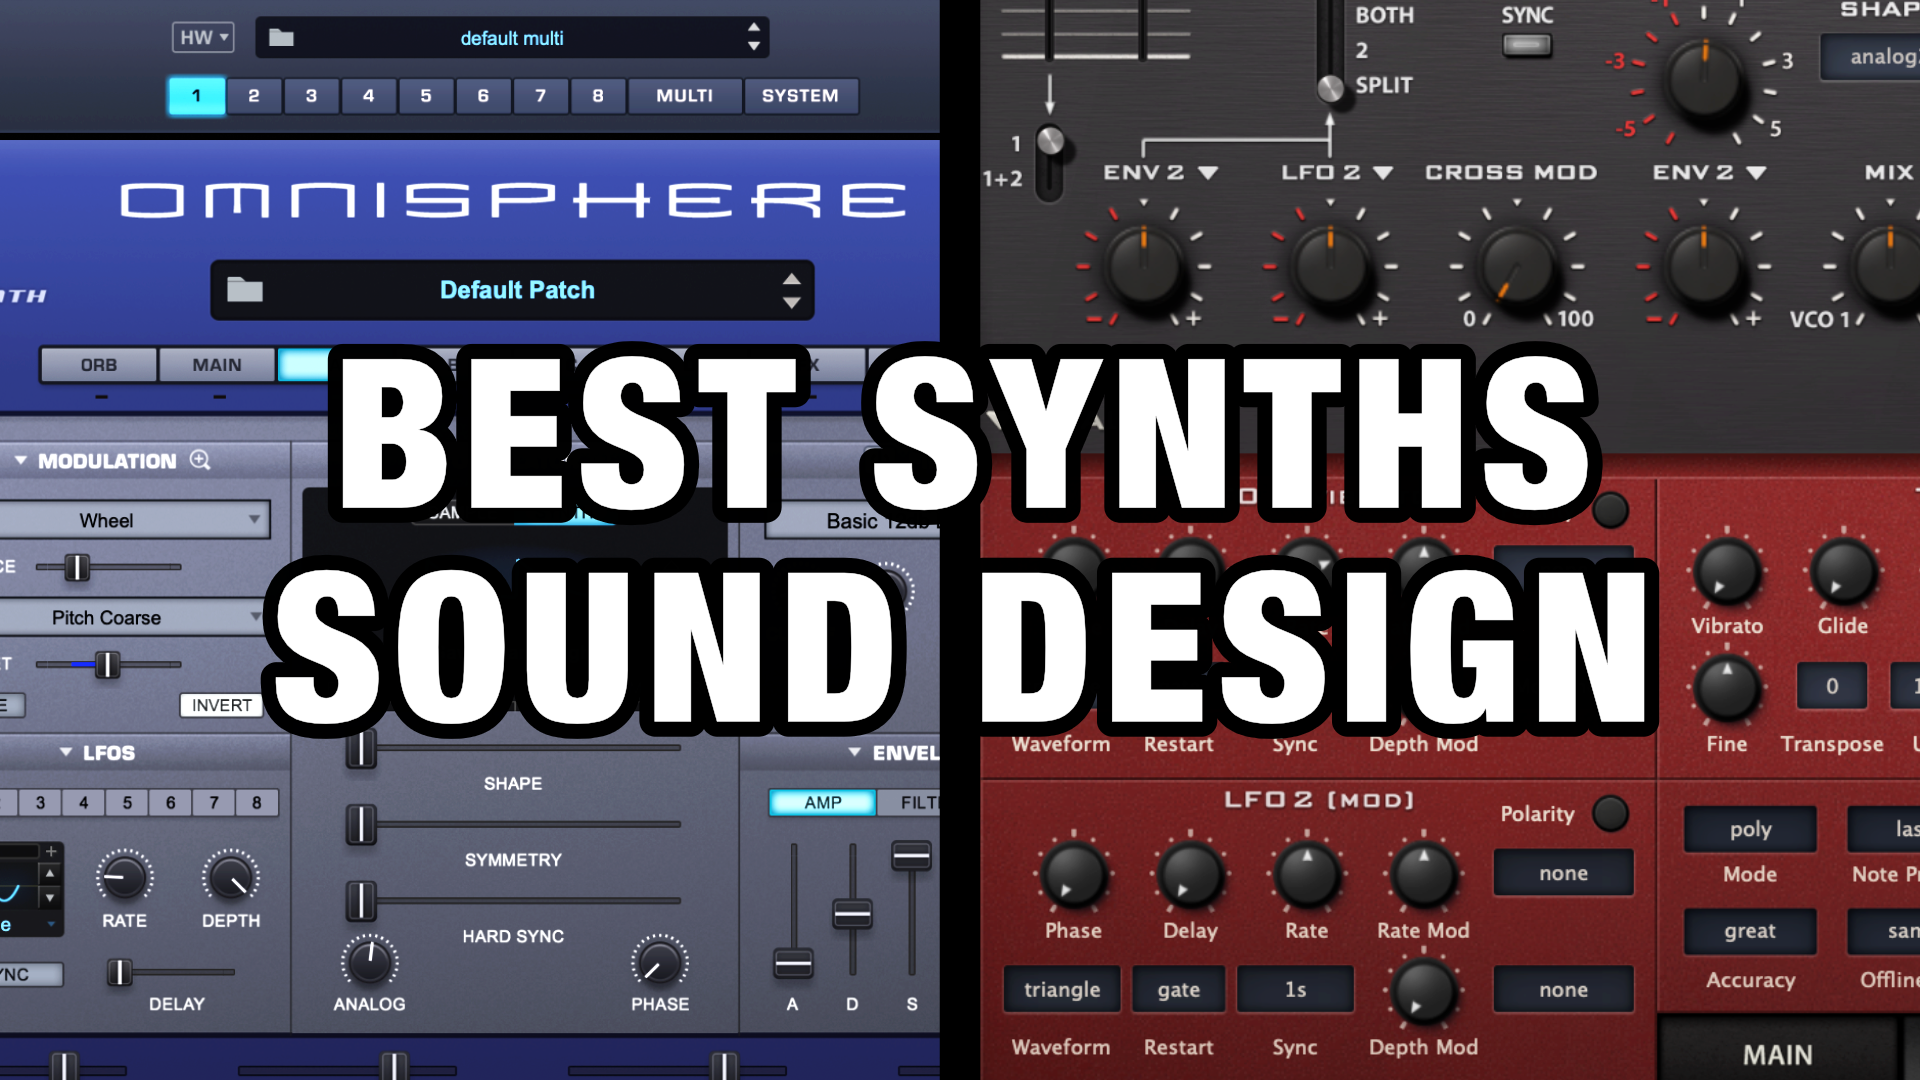 Best Synth Plugins for Sound Design